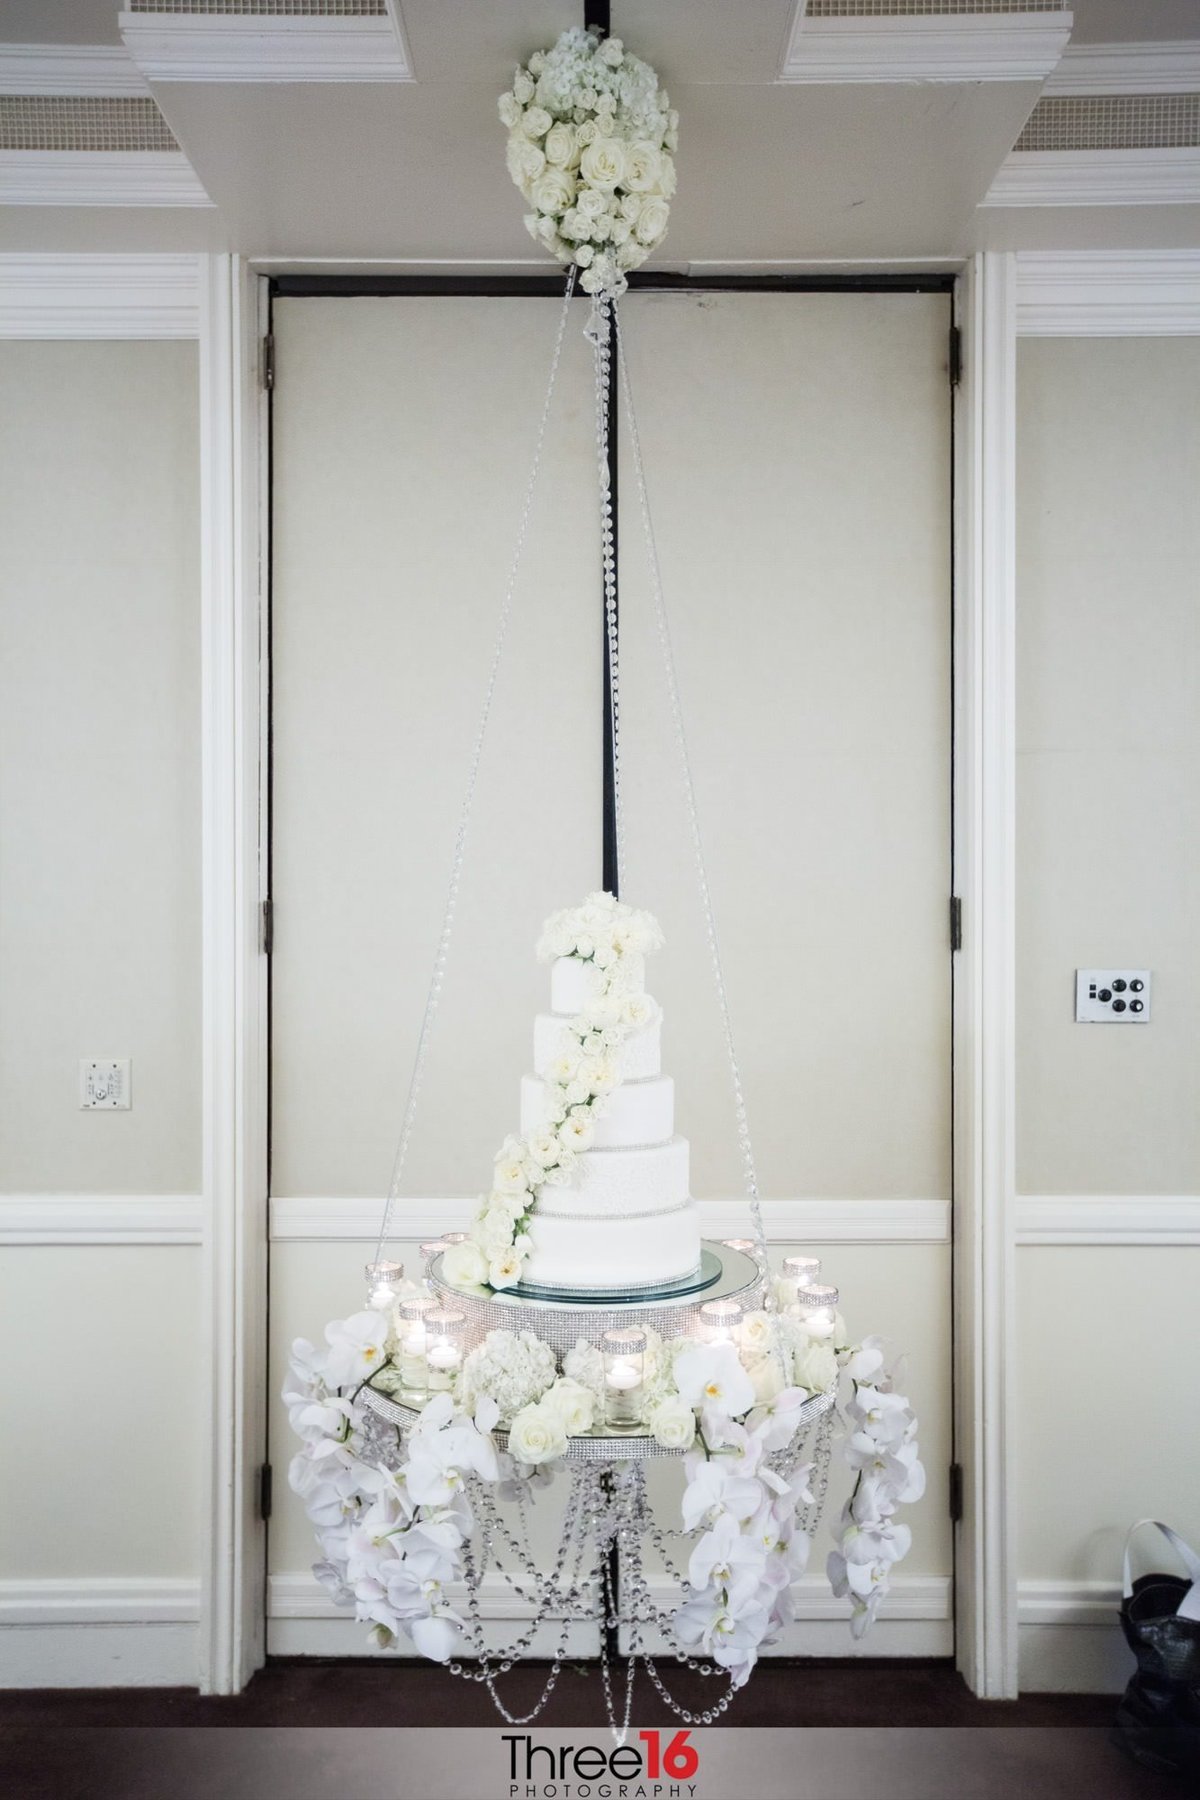 Amazing 5-tiered white wedding cake on display at the wedding reception